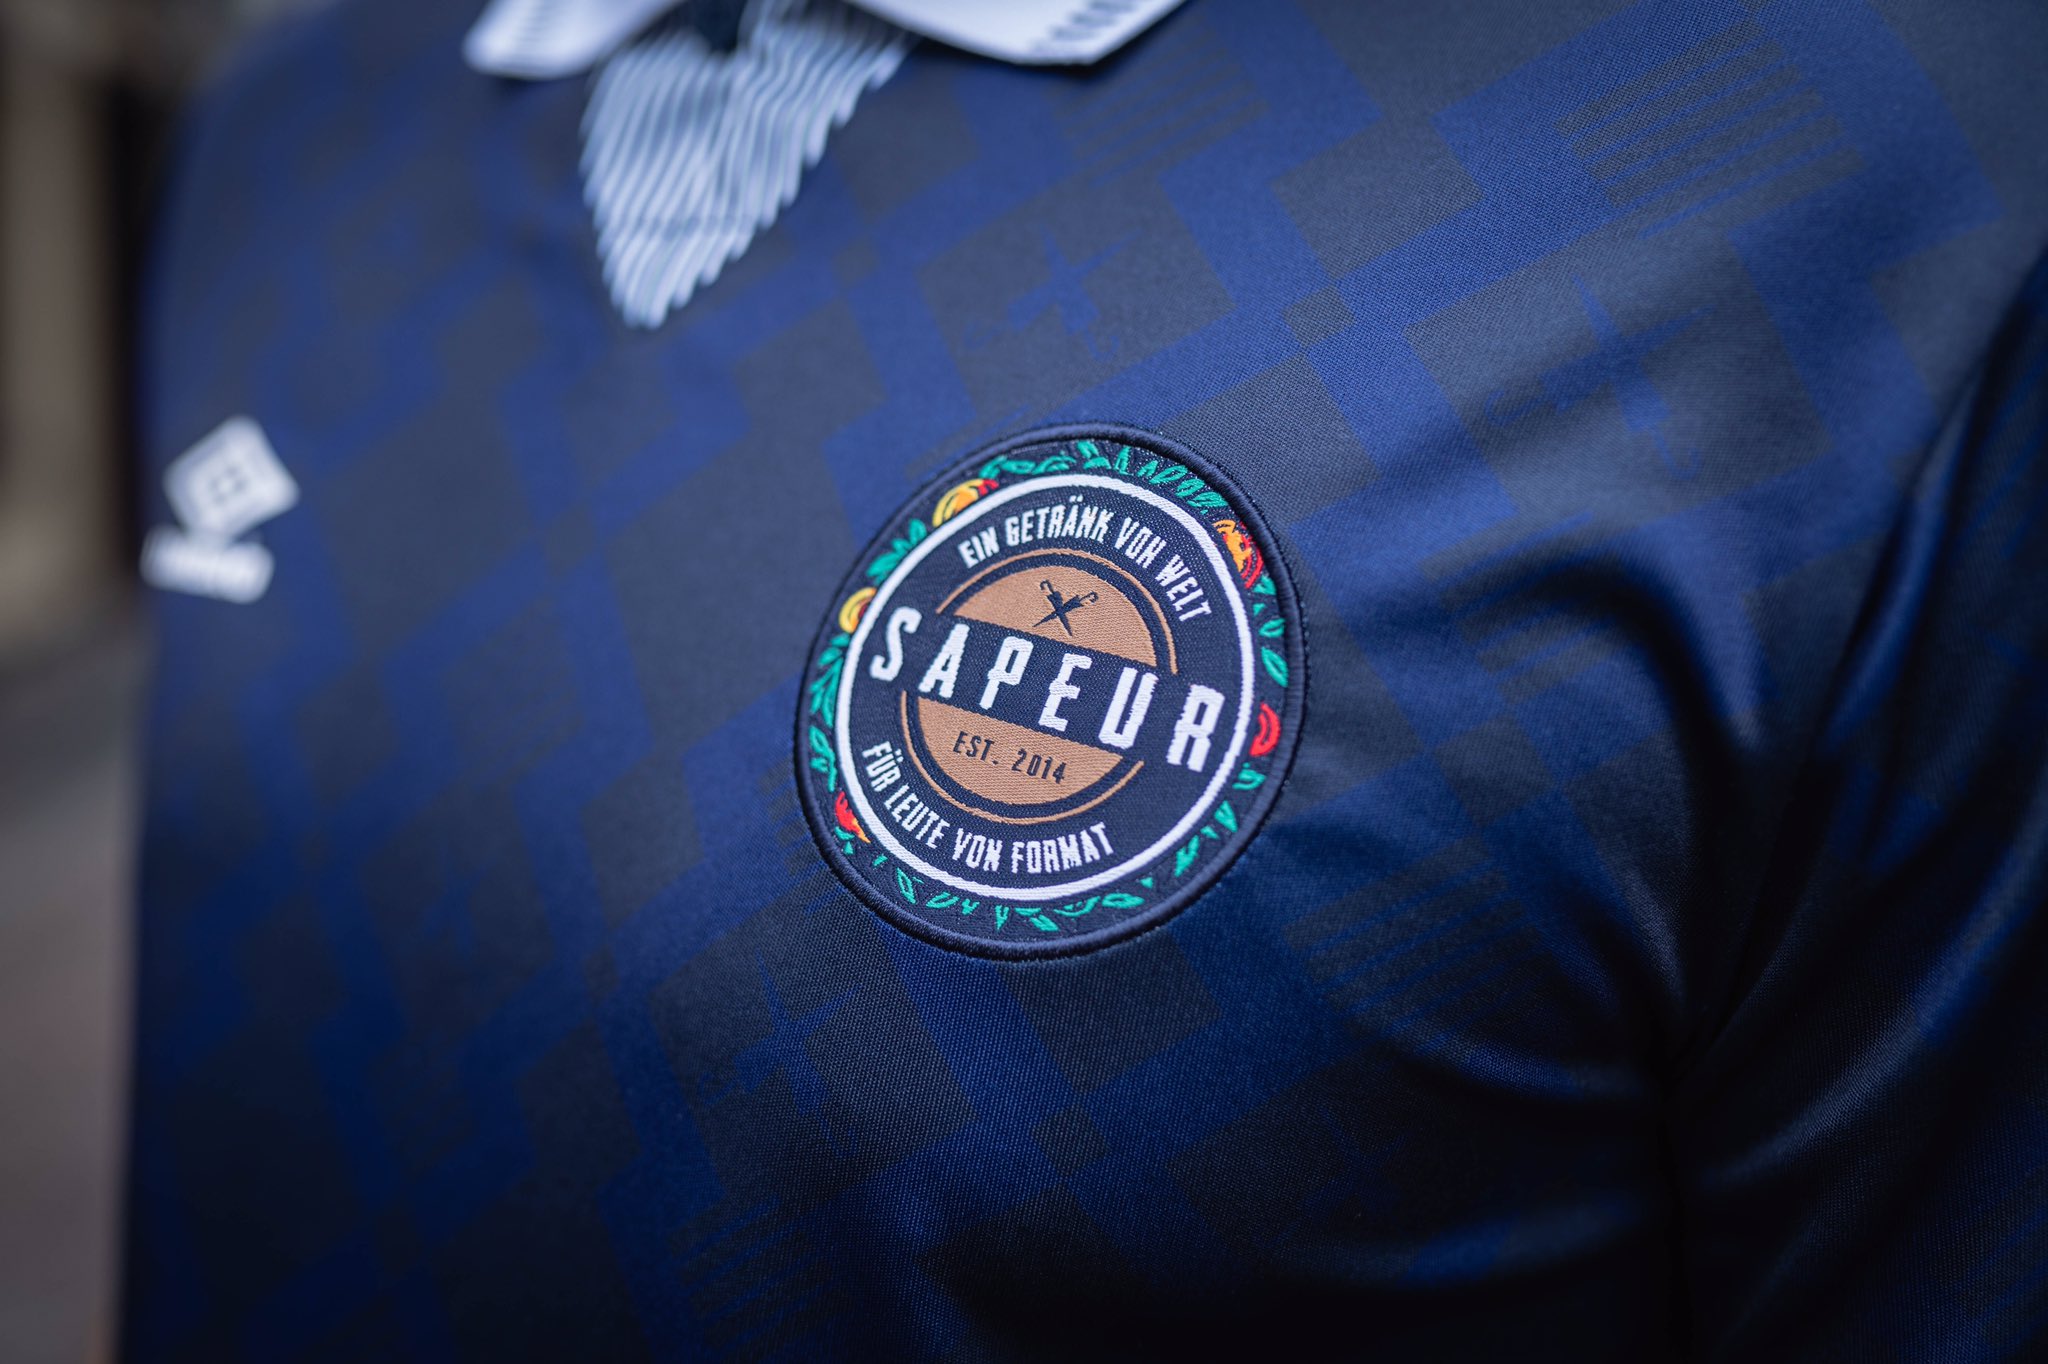 Umbro on Twitter: "Umbro x Sapeur revives and celebrates the spirit of a  special area in football culture, Frankfurt's favourite beverage and the  Sapeur blog that unites both through two archive inspired